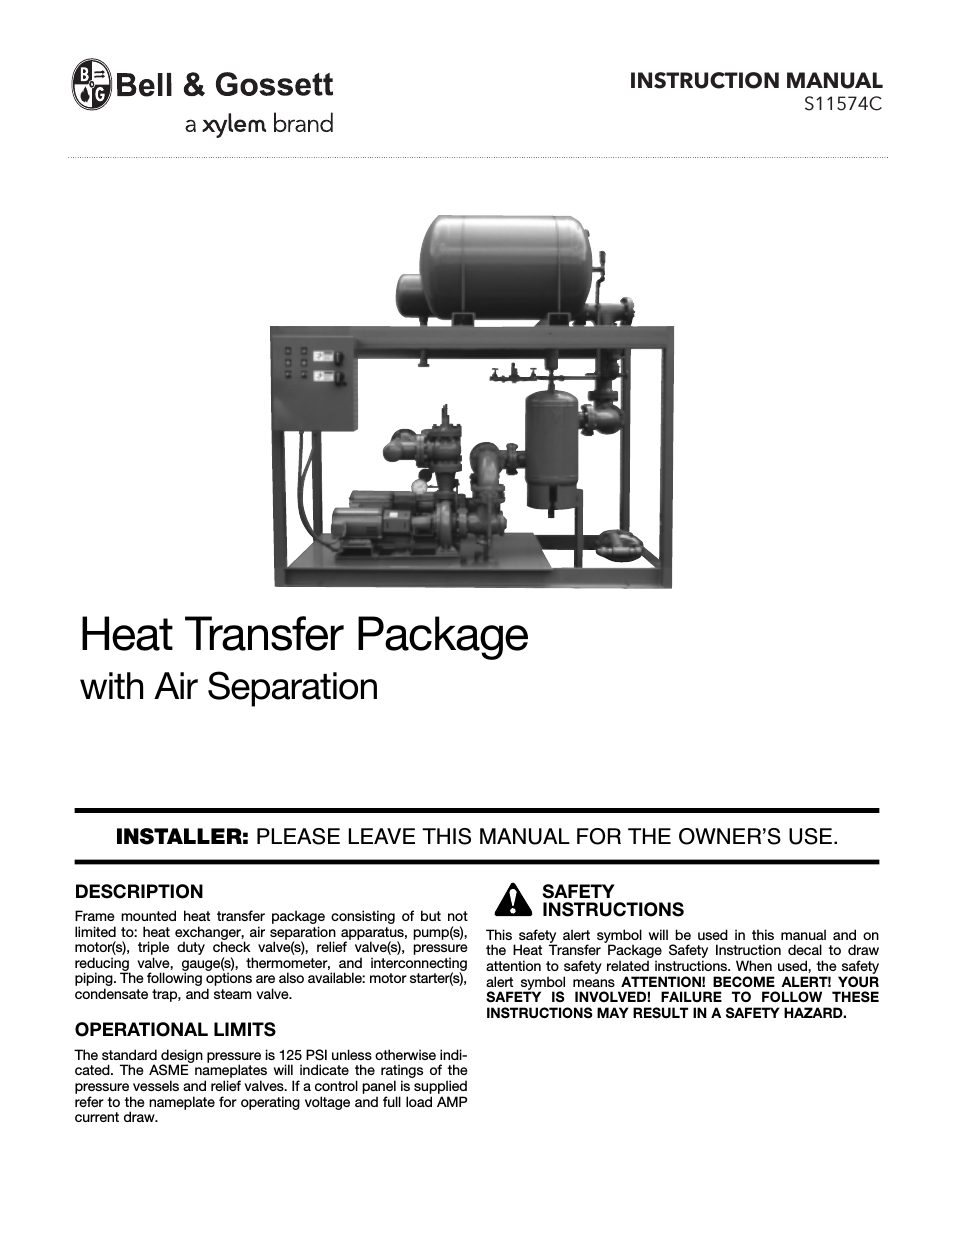 S11574C Heat Transfer Package with Air Separation